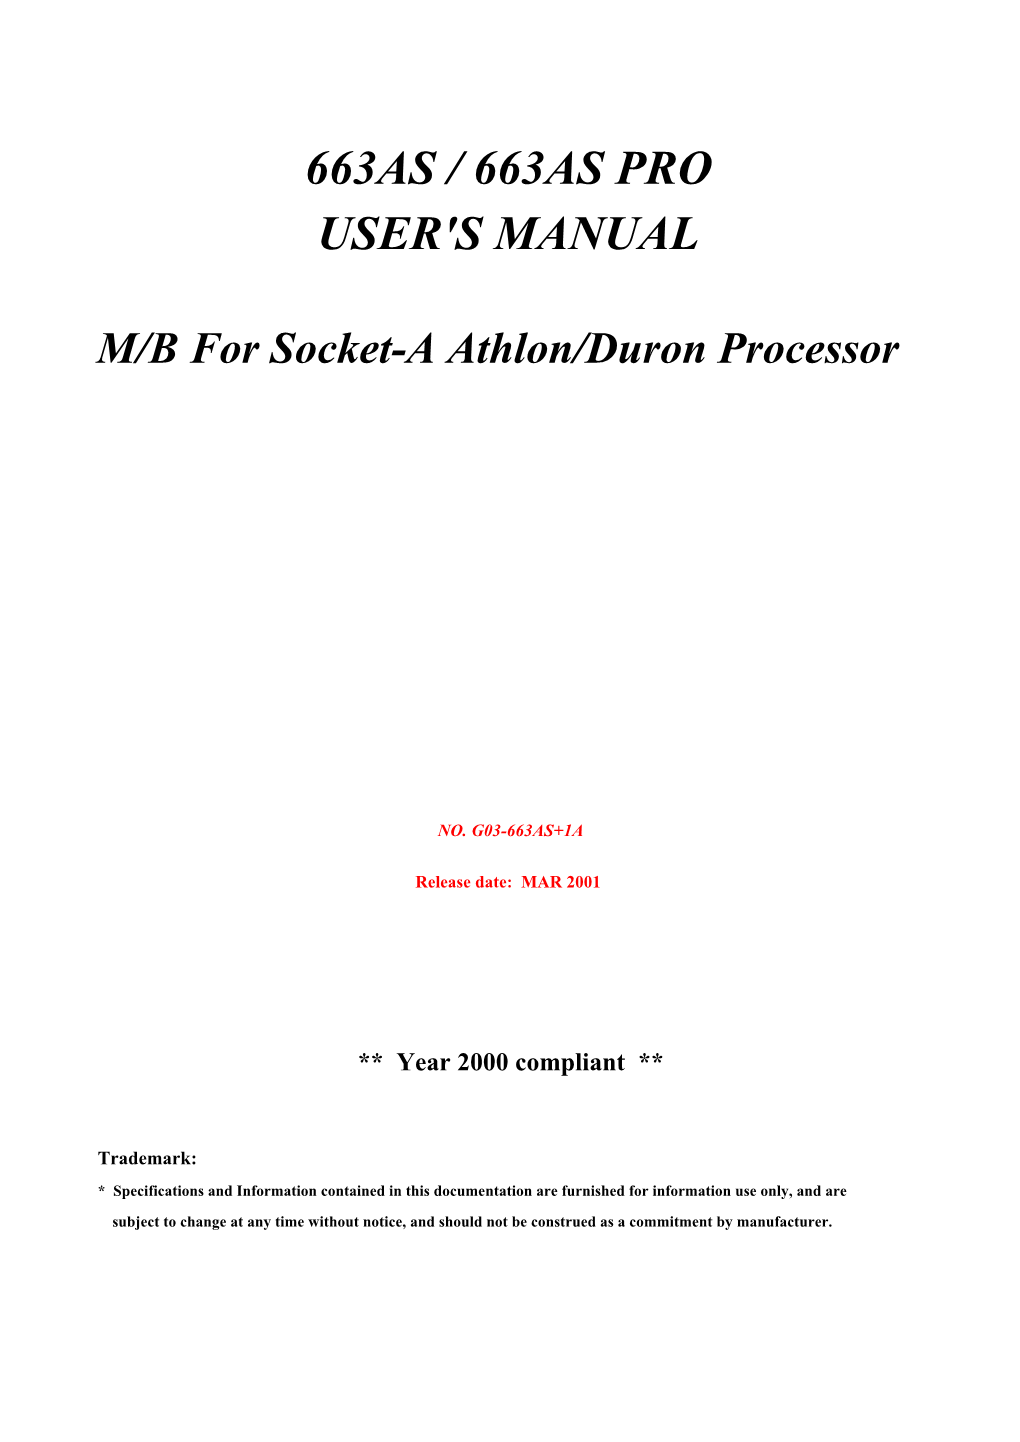 663As / 663As Pro User's Manual